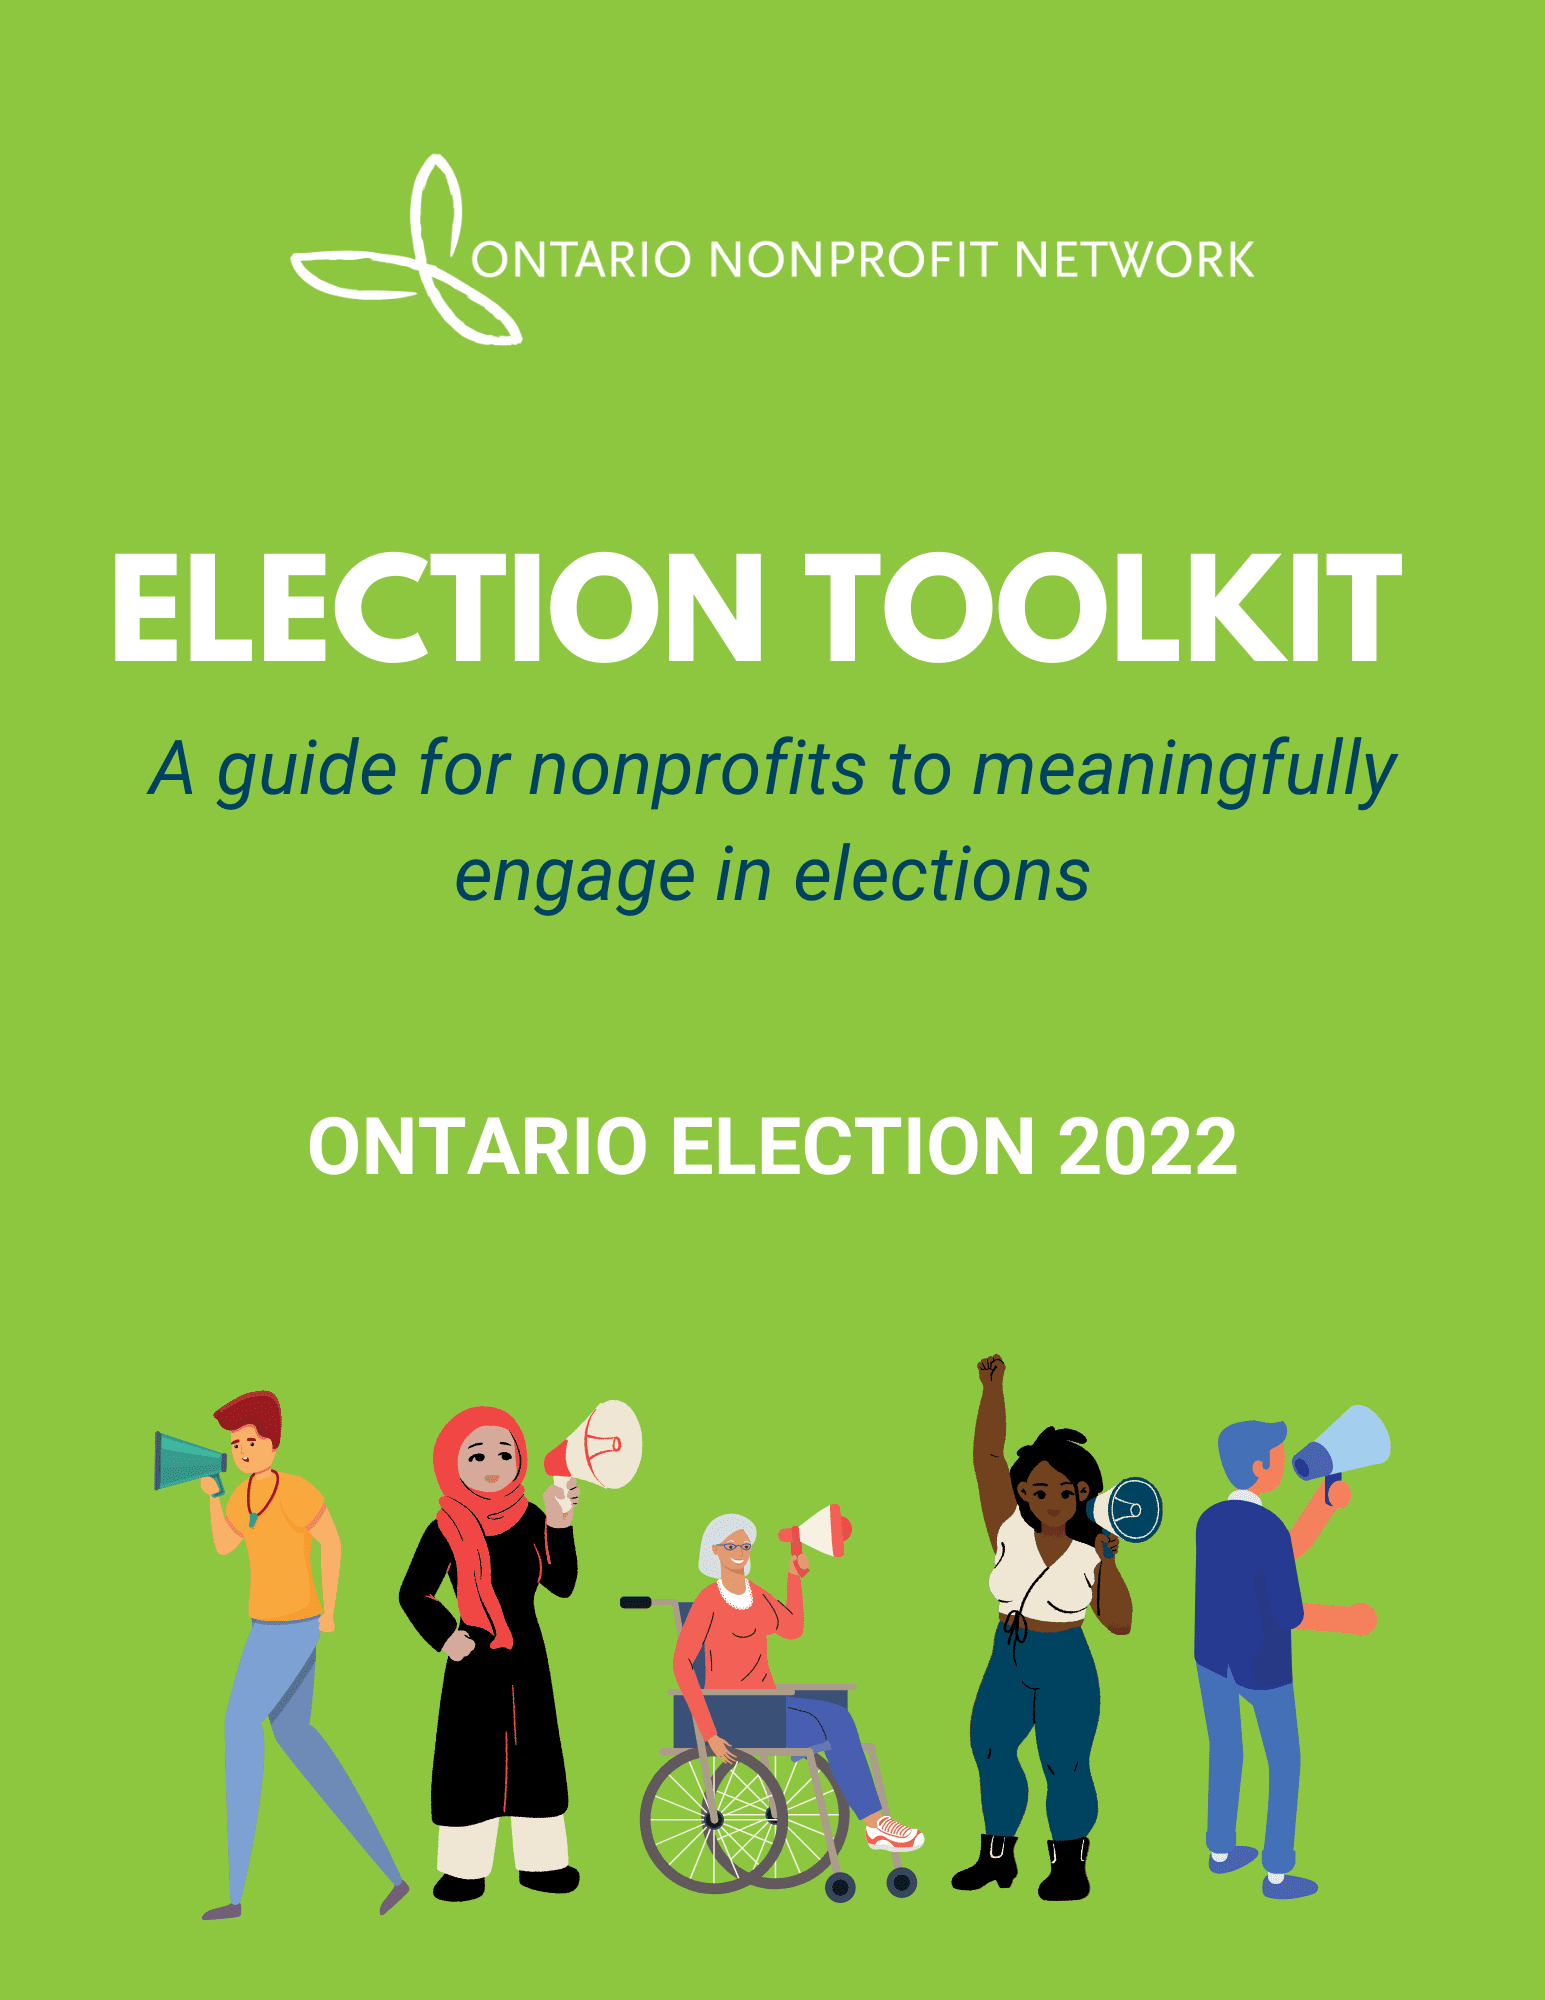 Election Advocacy Toolkit Cover Page. Page has a green background. At the top is O.N.N's logo. At the centre is large text that says, "Election toolkit. A guide for nonprofits to meaningfully engage in elections. Ontario Election 2022." At the bottom are five coloured graphics of humans to depict the nonprofit sector.